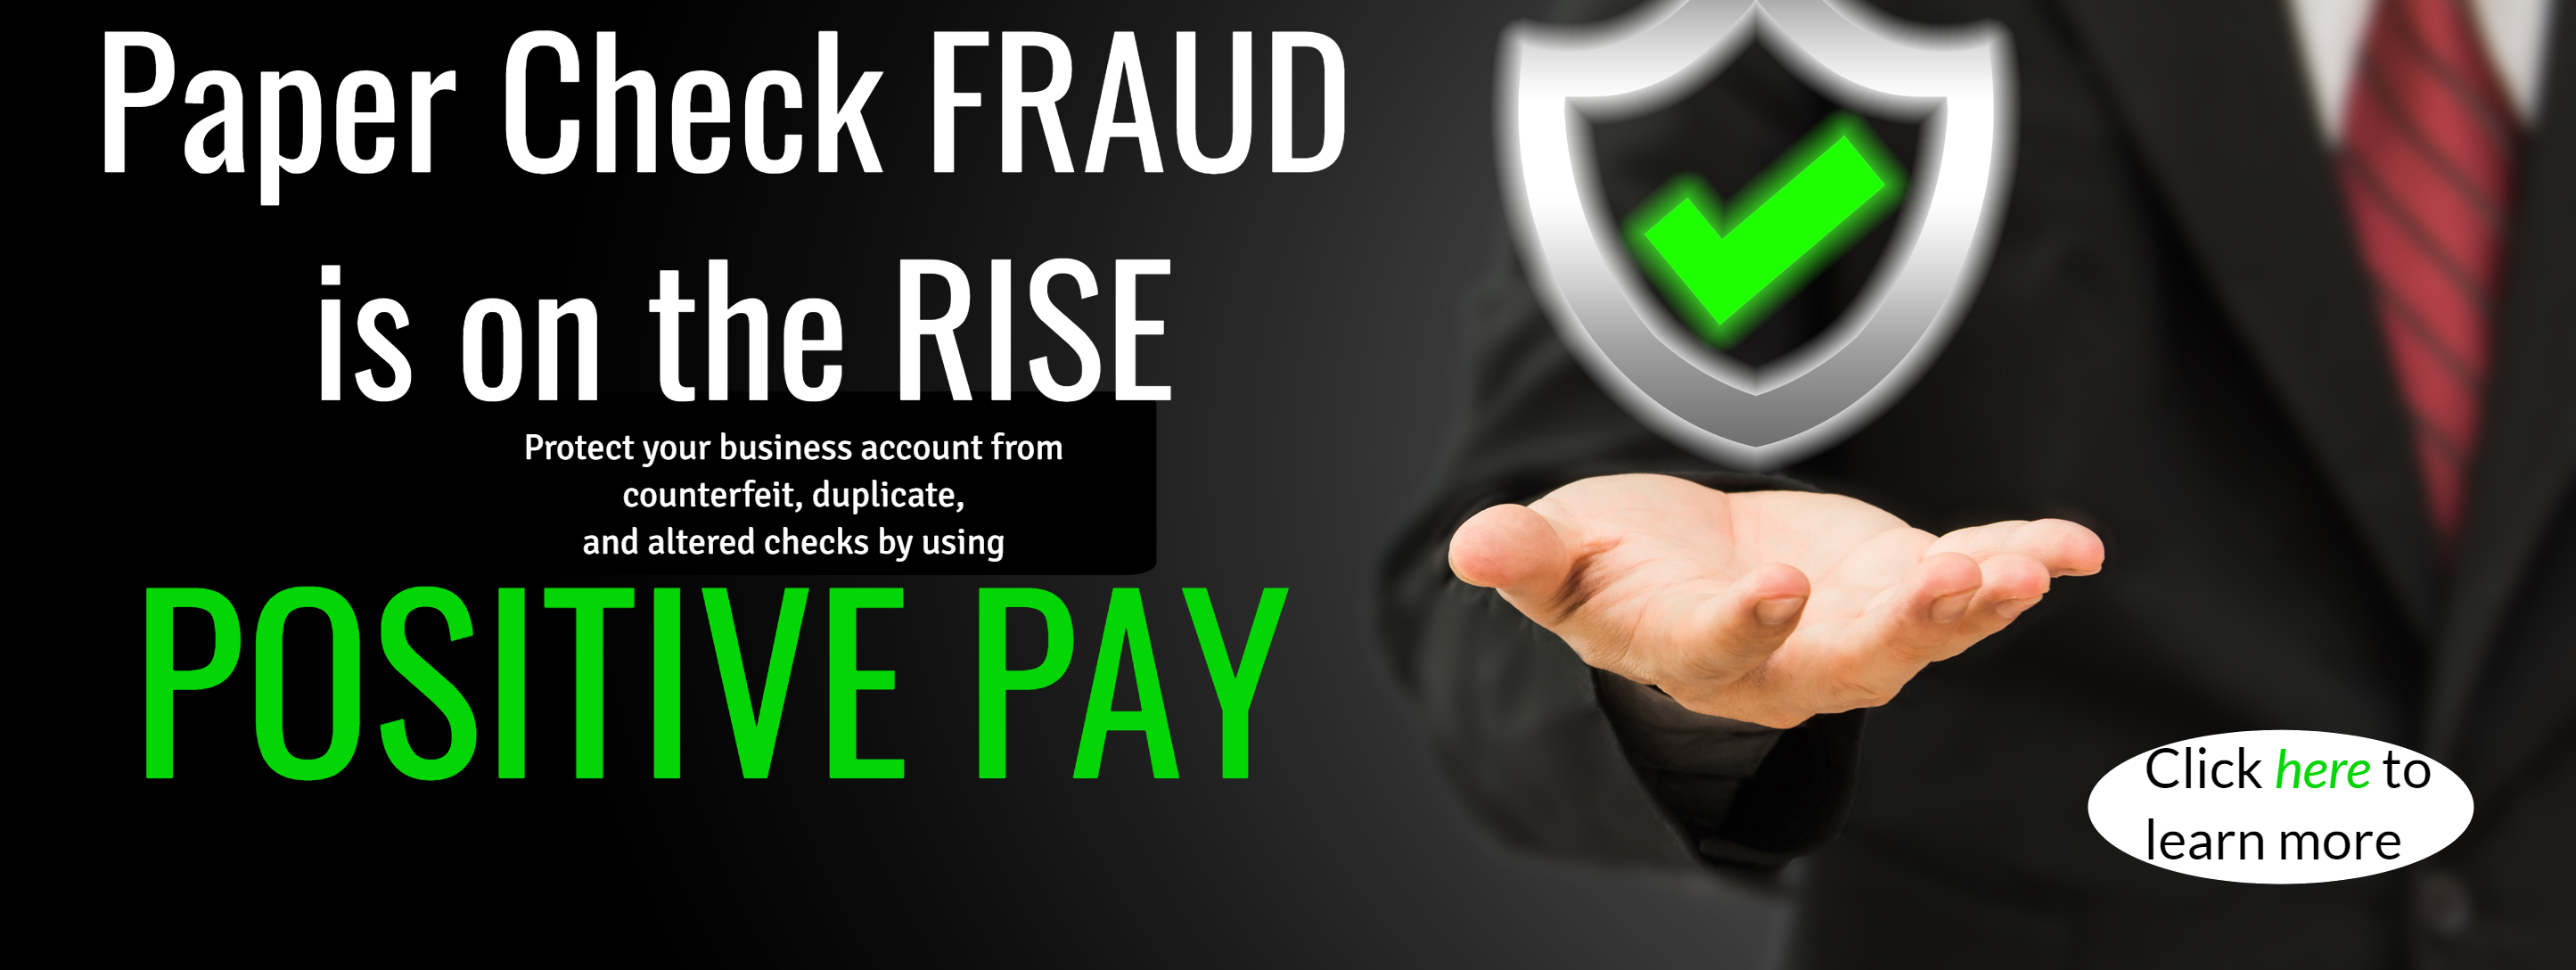 Paper Check FRAUD is on the RISE. Protect your business account from counterfeit, duplicate, and altered checks by using Positive Pay. Click here to learn more.